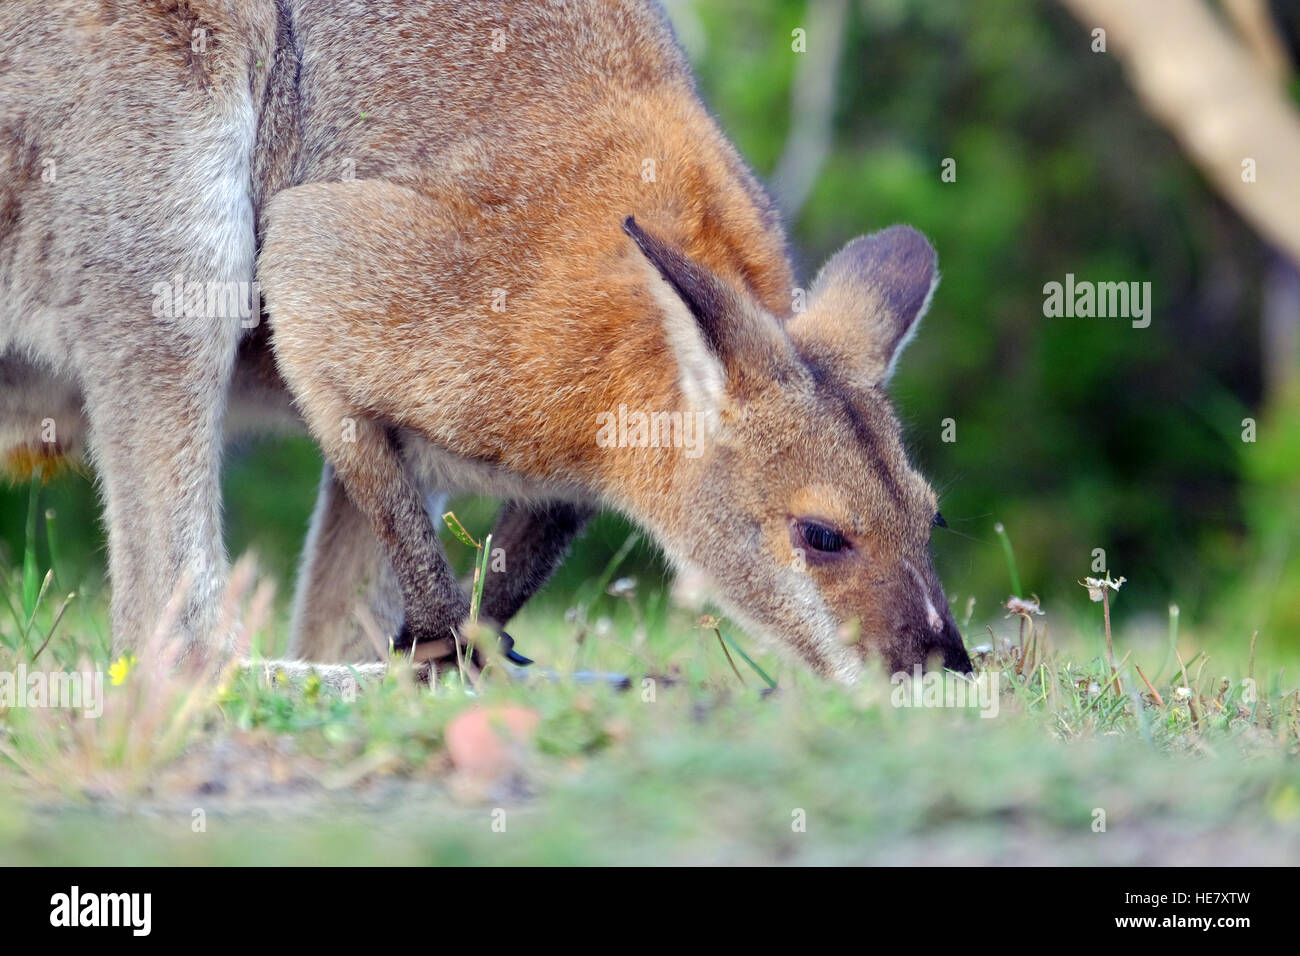 A kangaroo in a field in the state of Victoria,Australia Stock Photo